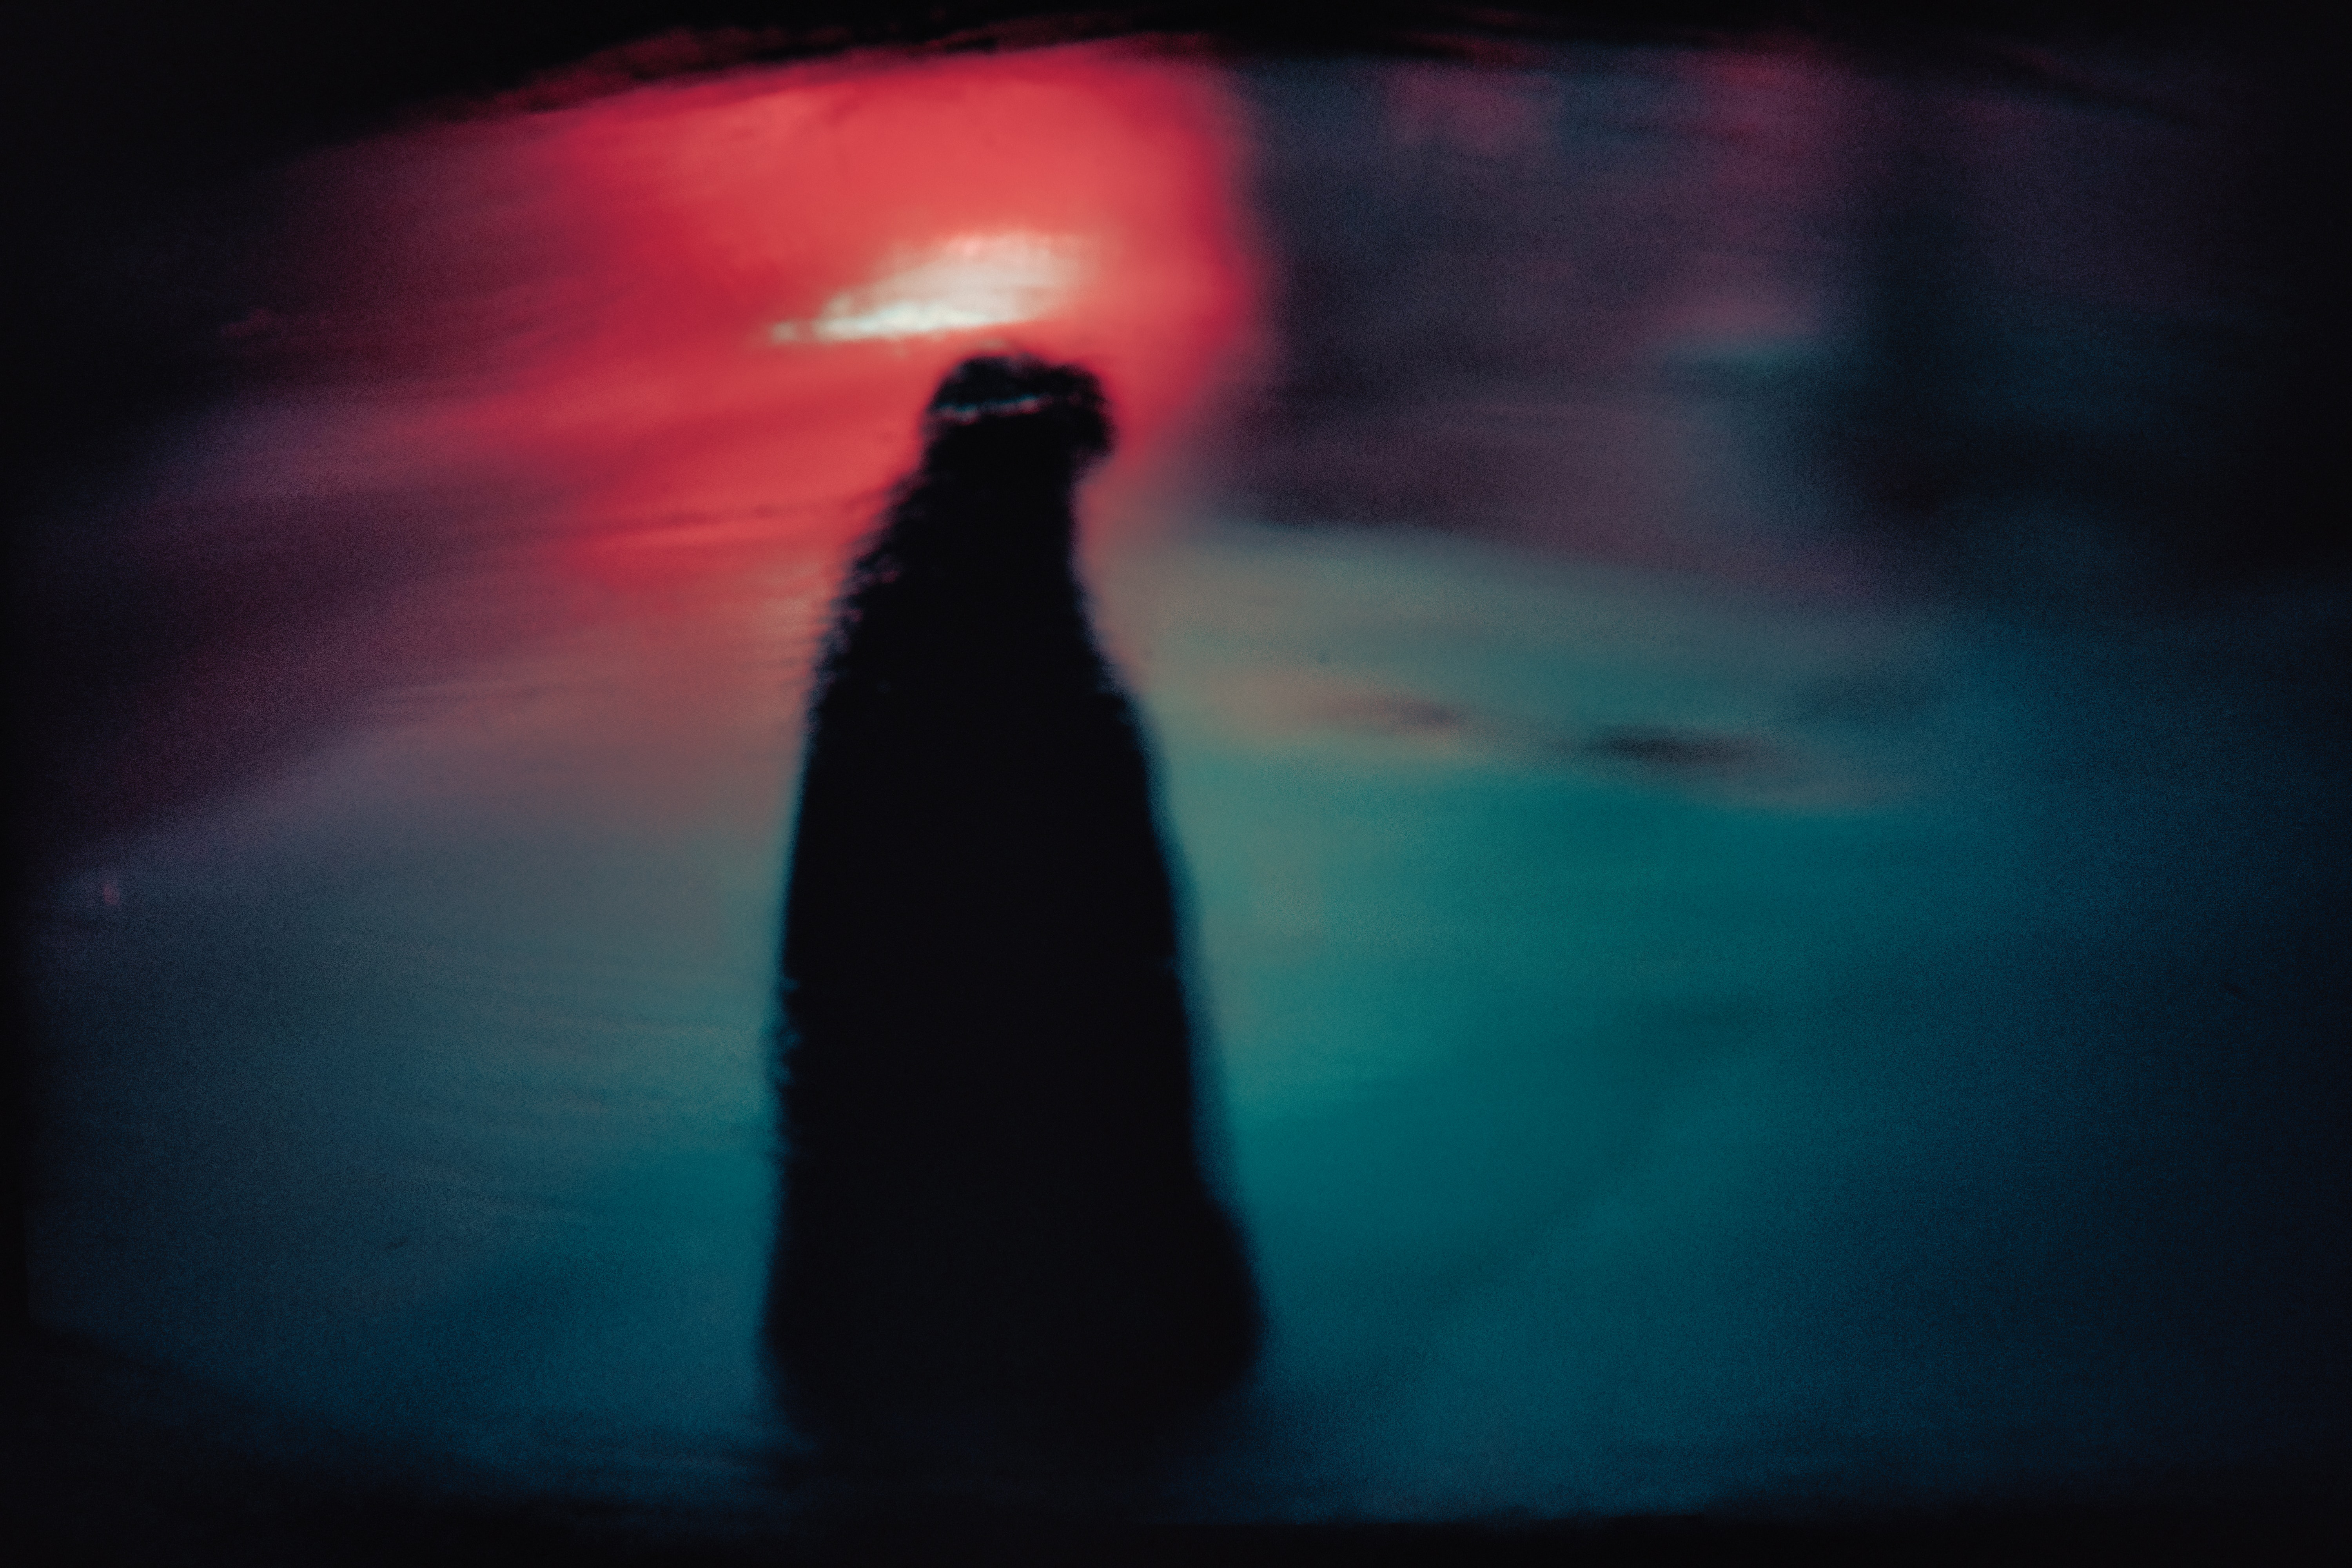 Unfocused picture of a woman's silhouette at night with a smudgy background